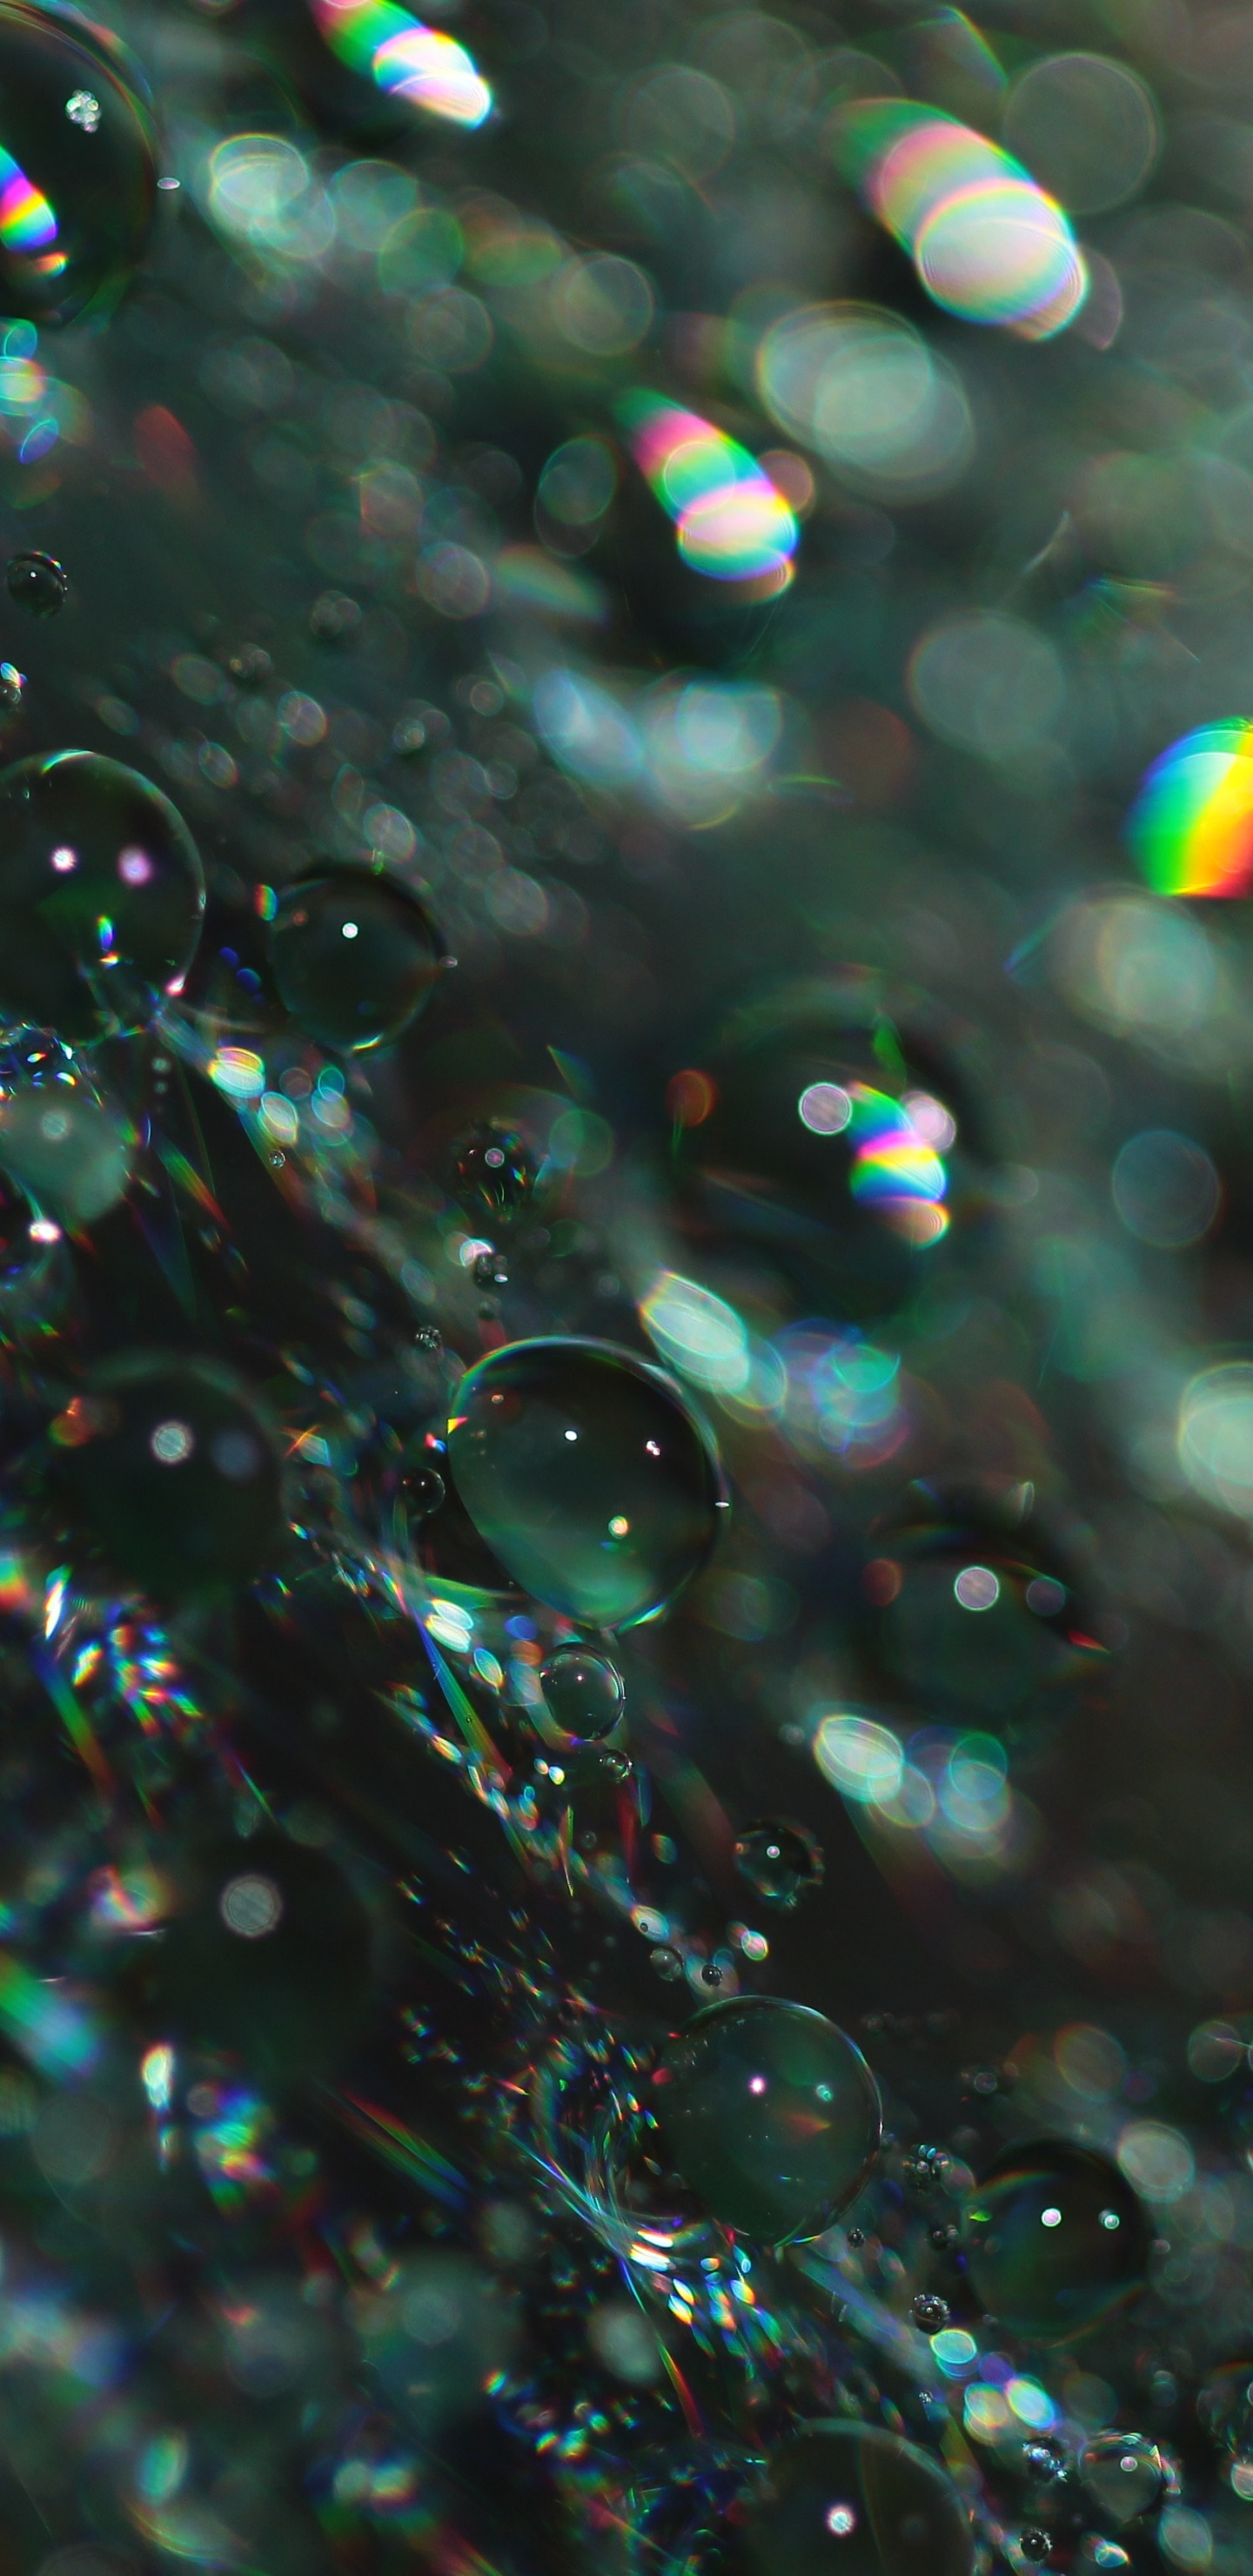 Water Droplets on Glass During Daytime. Wallpaper in 1440x2960 Resolution